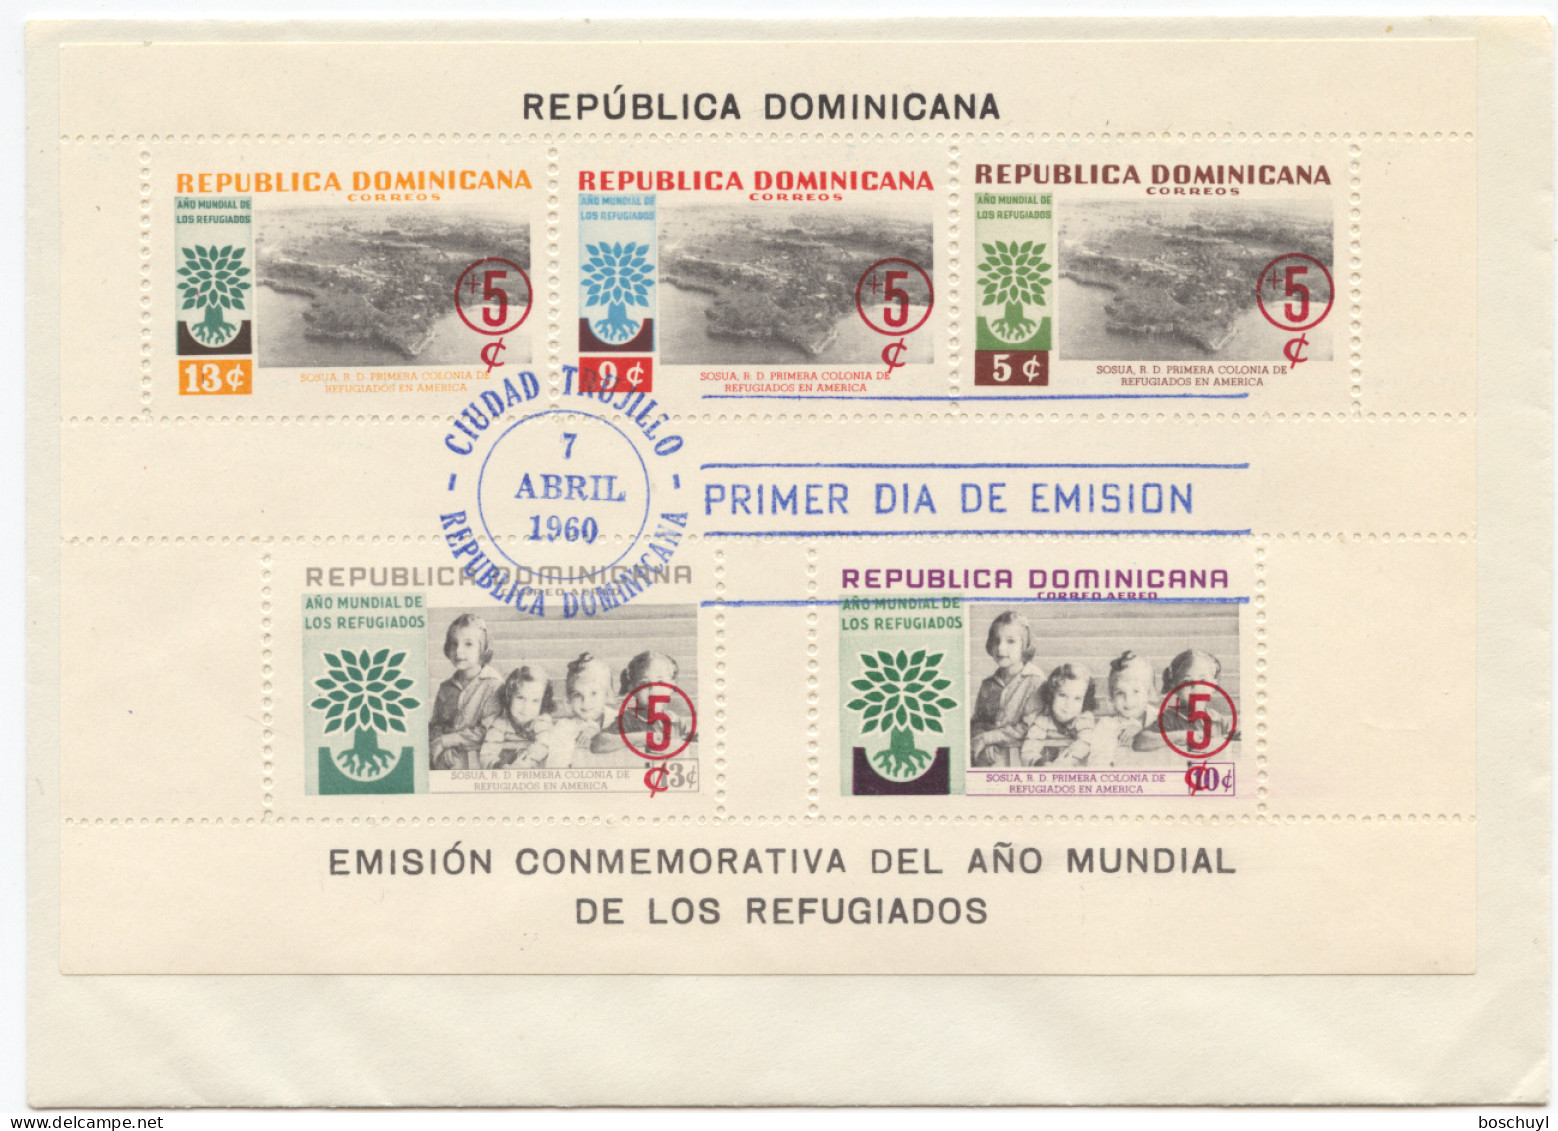 Dominican Republic, 1960, World Refugee Year, WRY, United Nations, Overprinted, On Cover, FD Cancelled, Michel Block 24A - Réfugiés